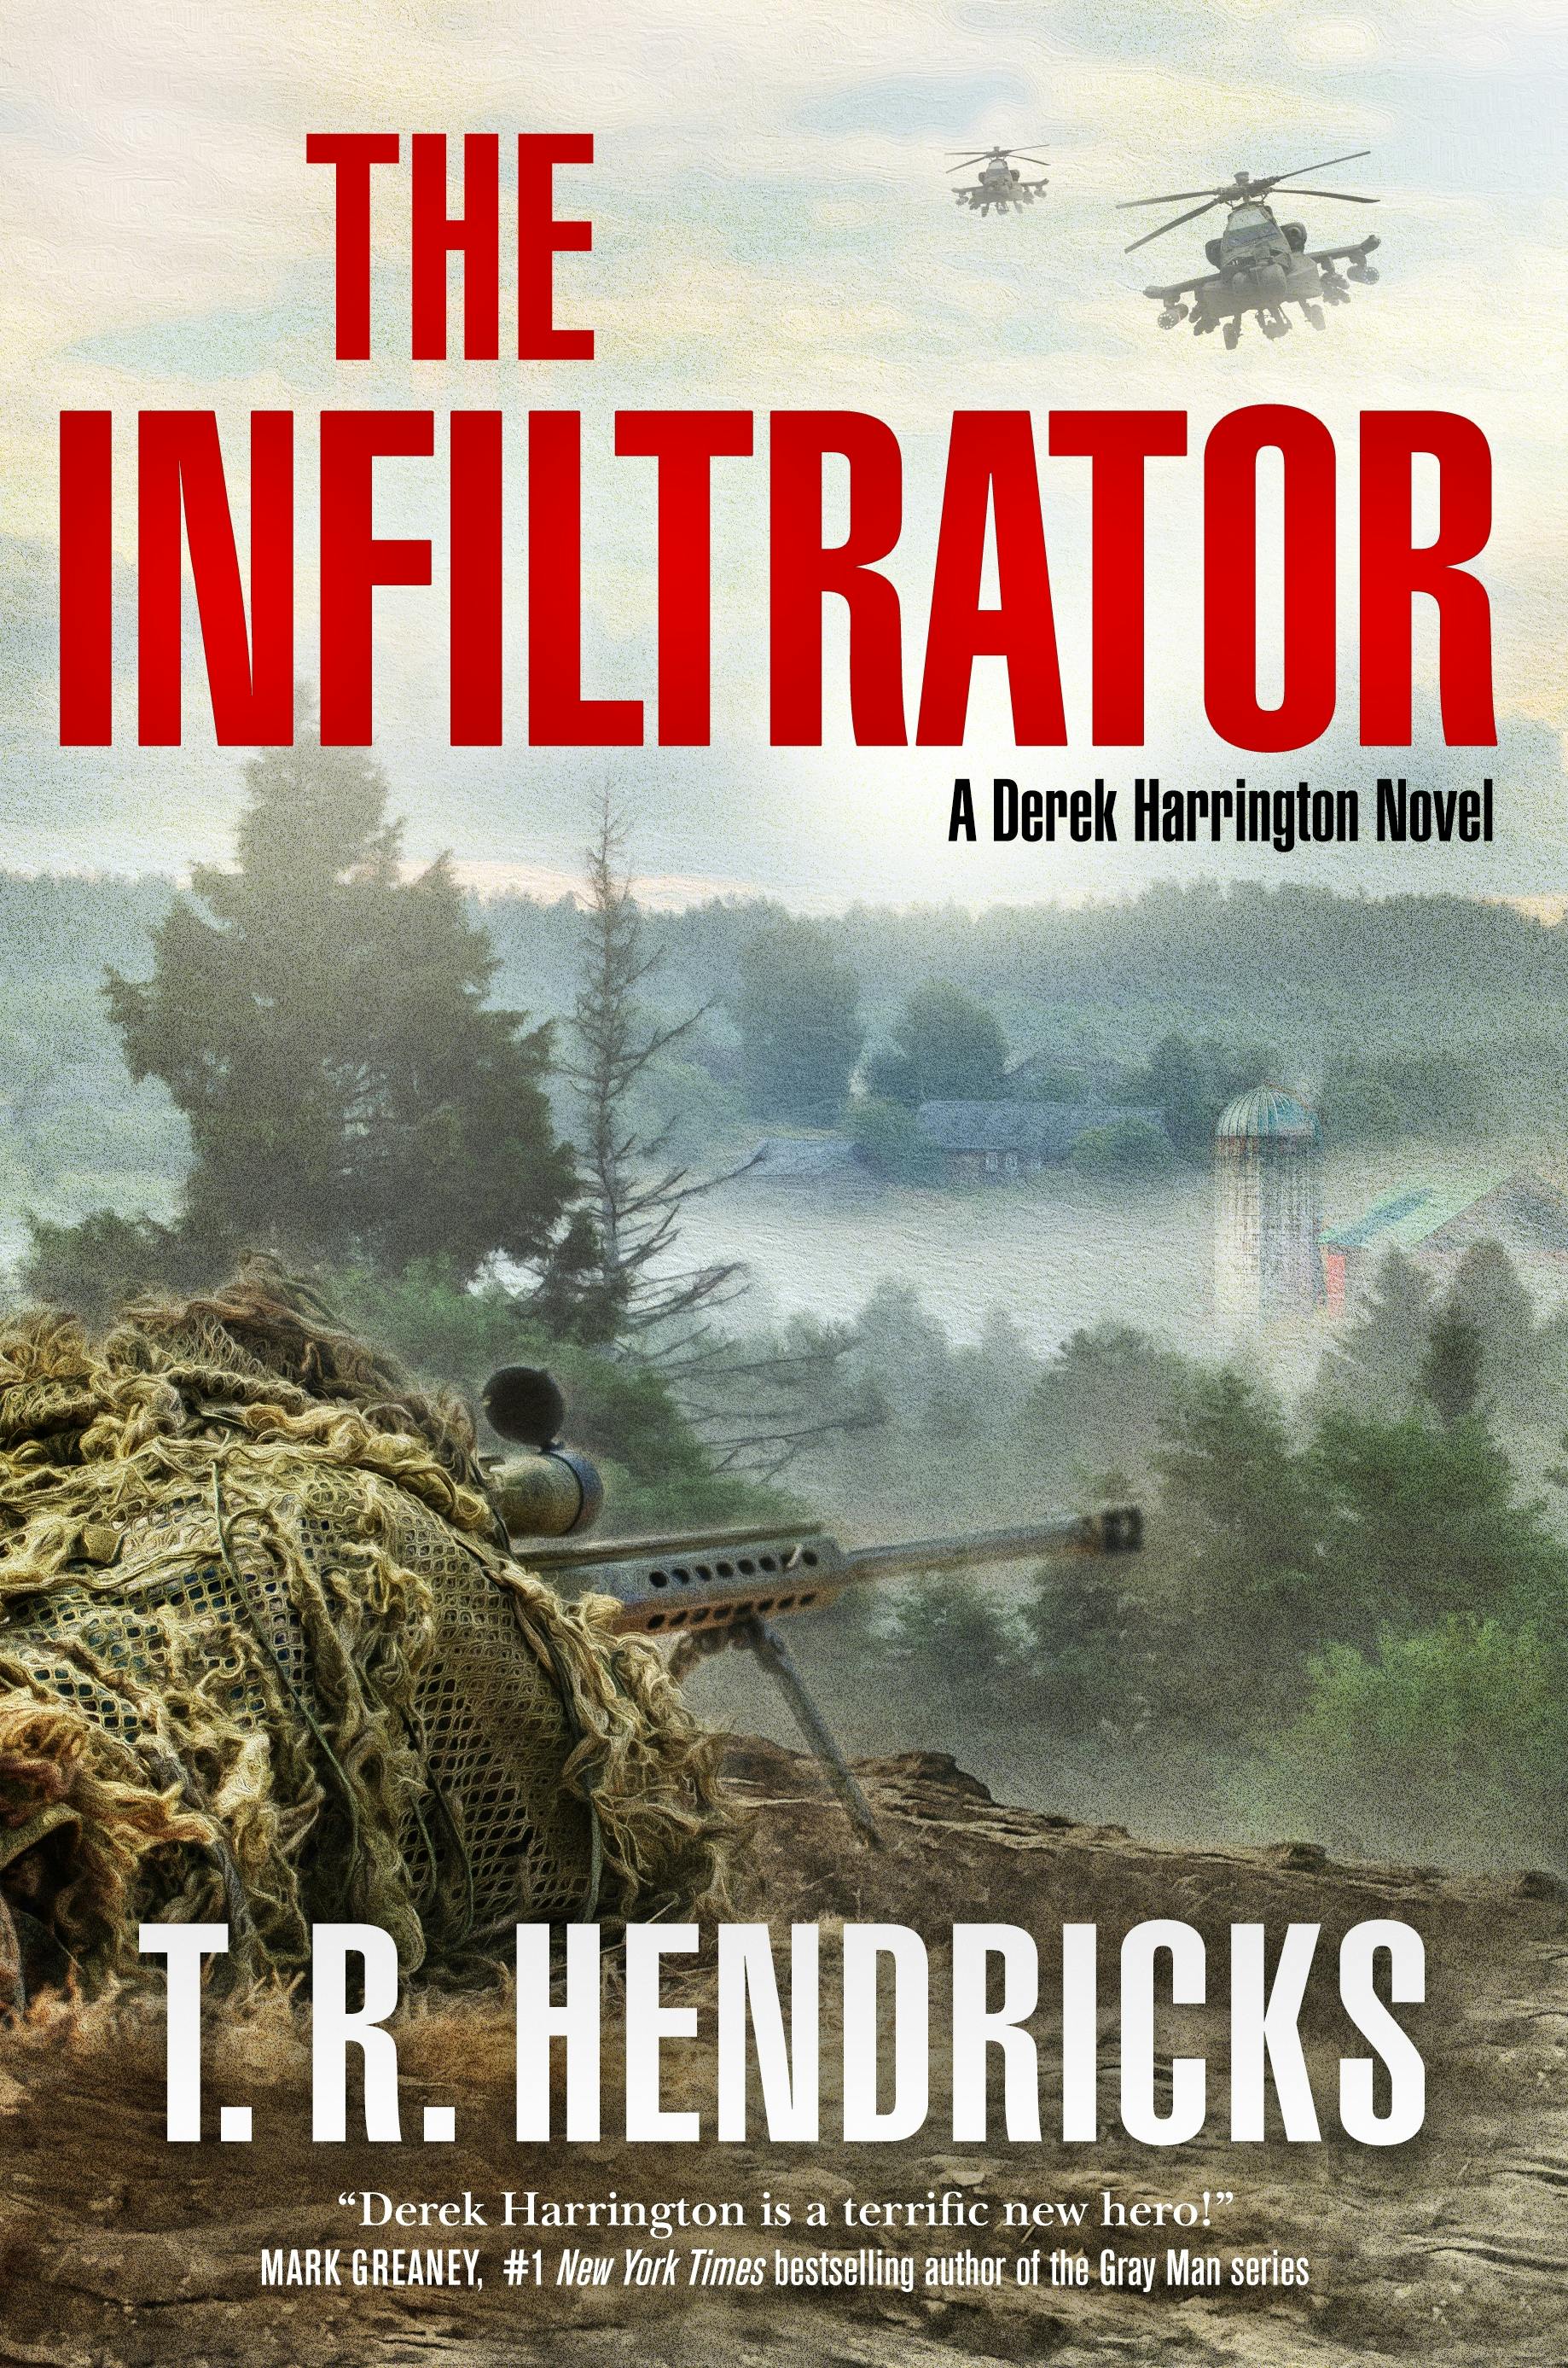 Cover for the book titled as: The Infiltrator